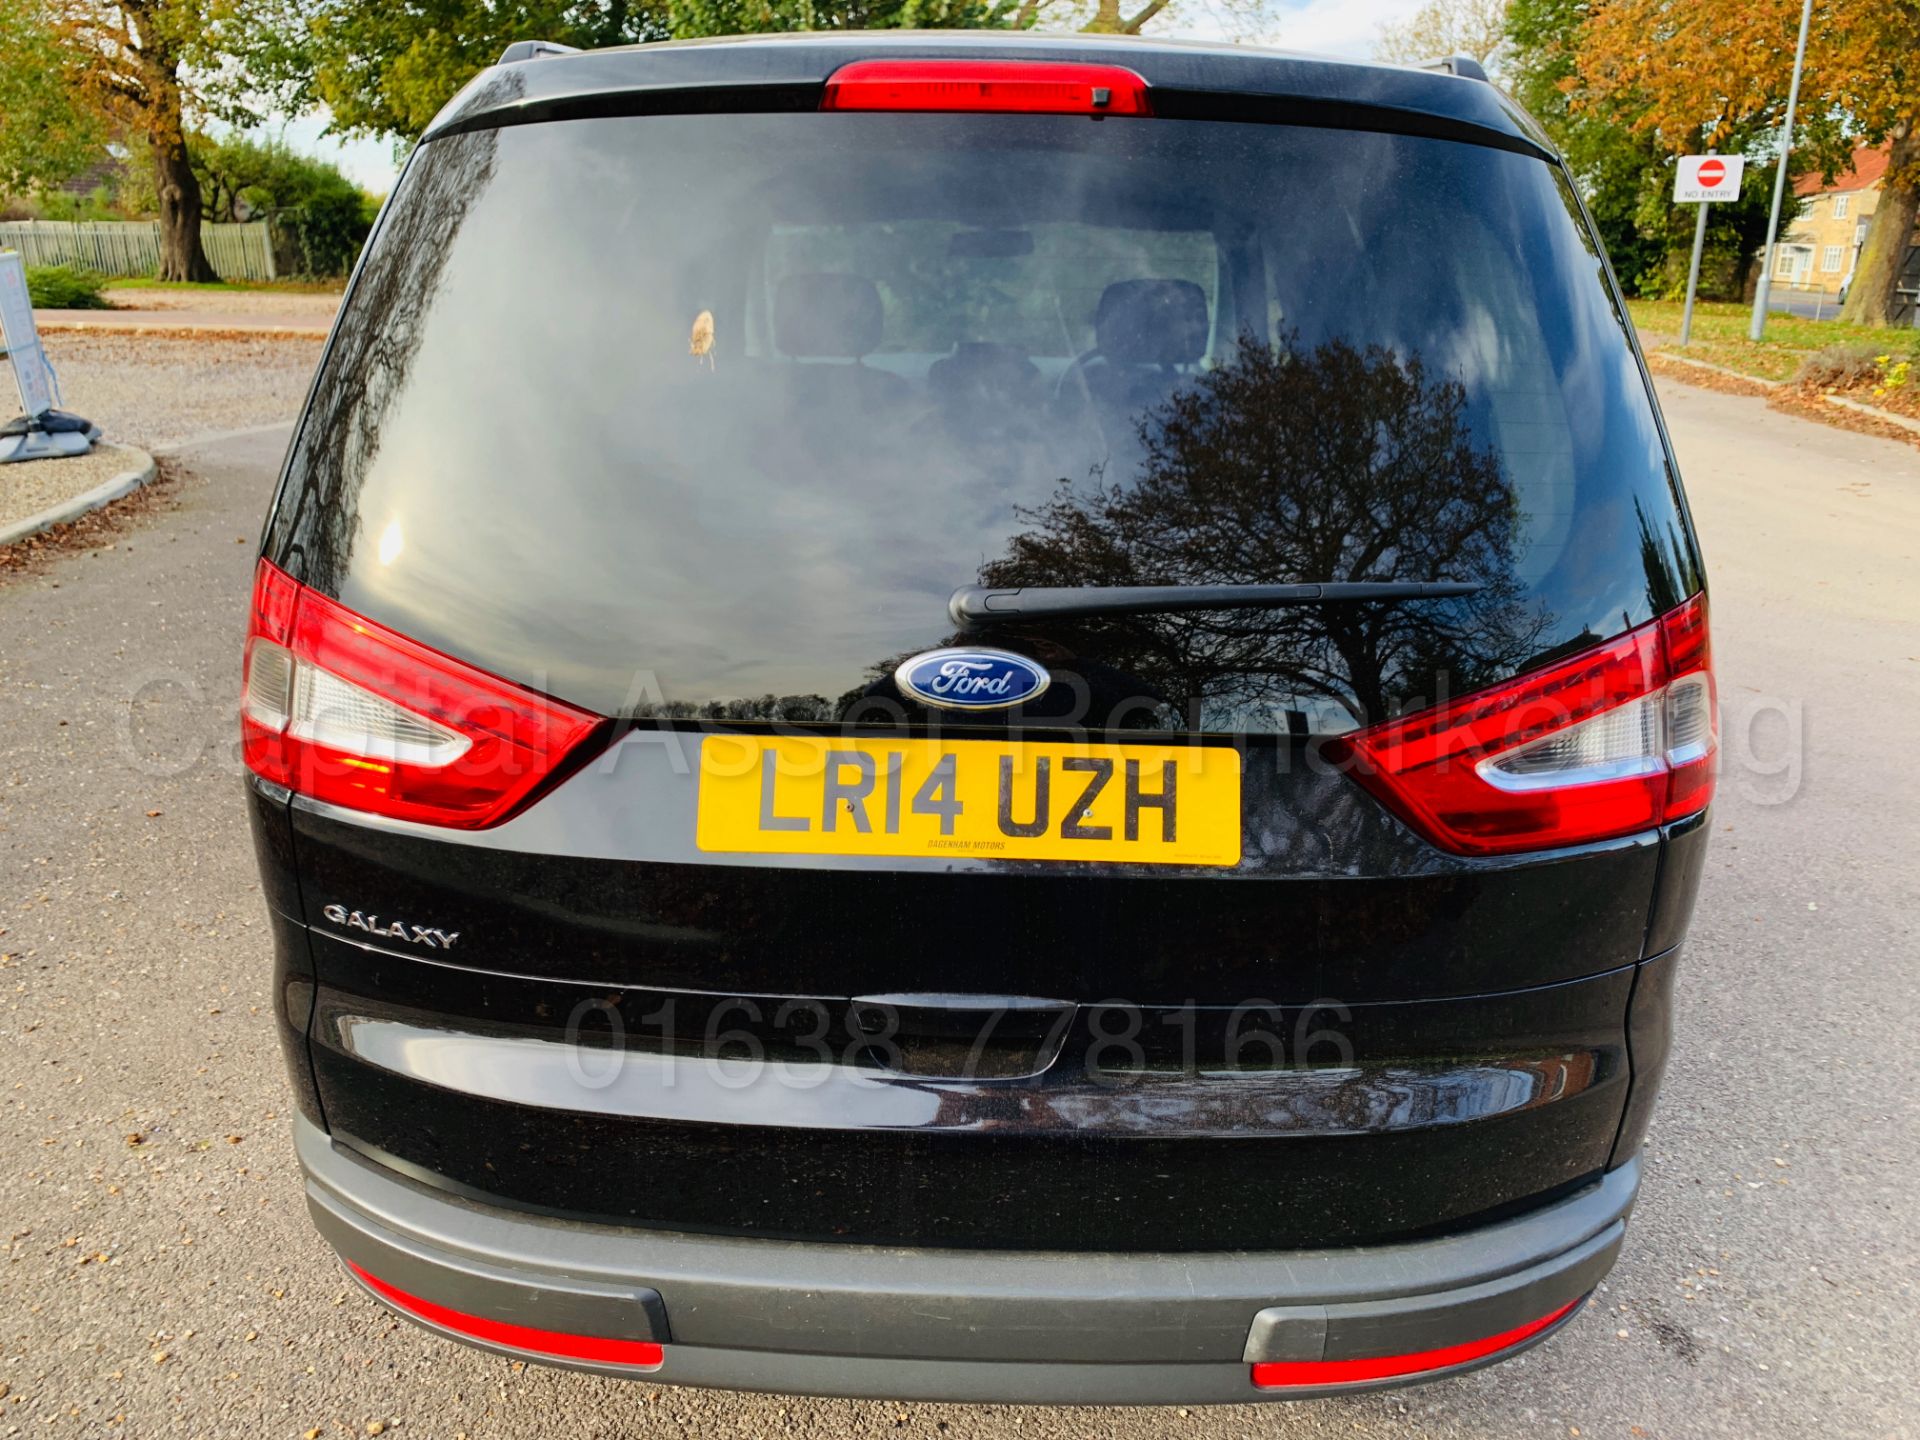 (ON SALE) FORD GALAXY **ZETEC** 7 SEATER MPV (2014) 2.0 TDCI - 140 BHP - AUTO POWER SHIFT (1 OWNER) - Image 9 of 37